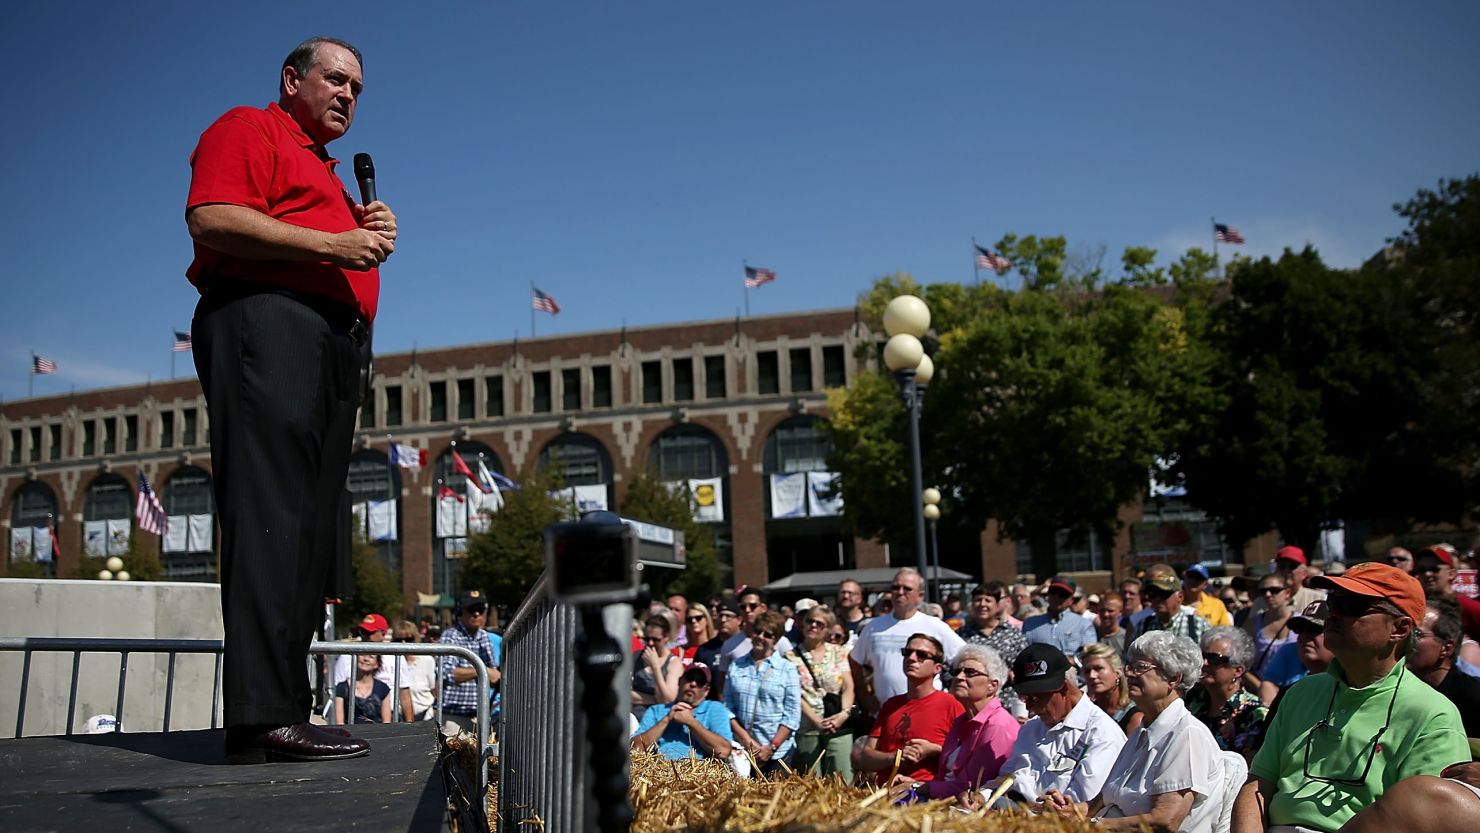 Republican presidential hopeful and former Arkansas Gov. Mike Huckabee speaks to fairgoers at the Iowa State Fair on August 13, 2015 in Des Moines, Iowa.